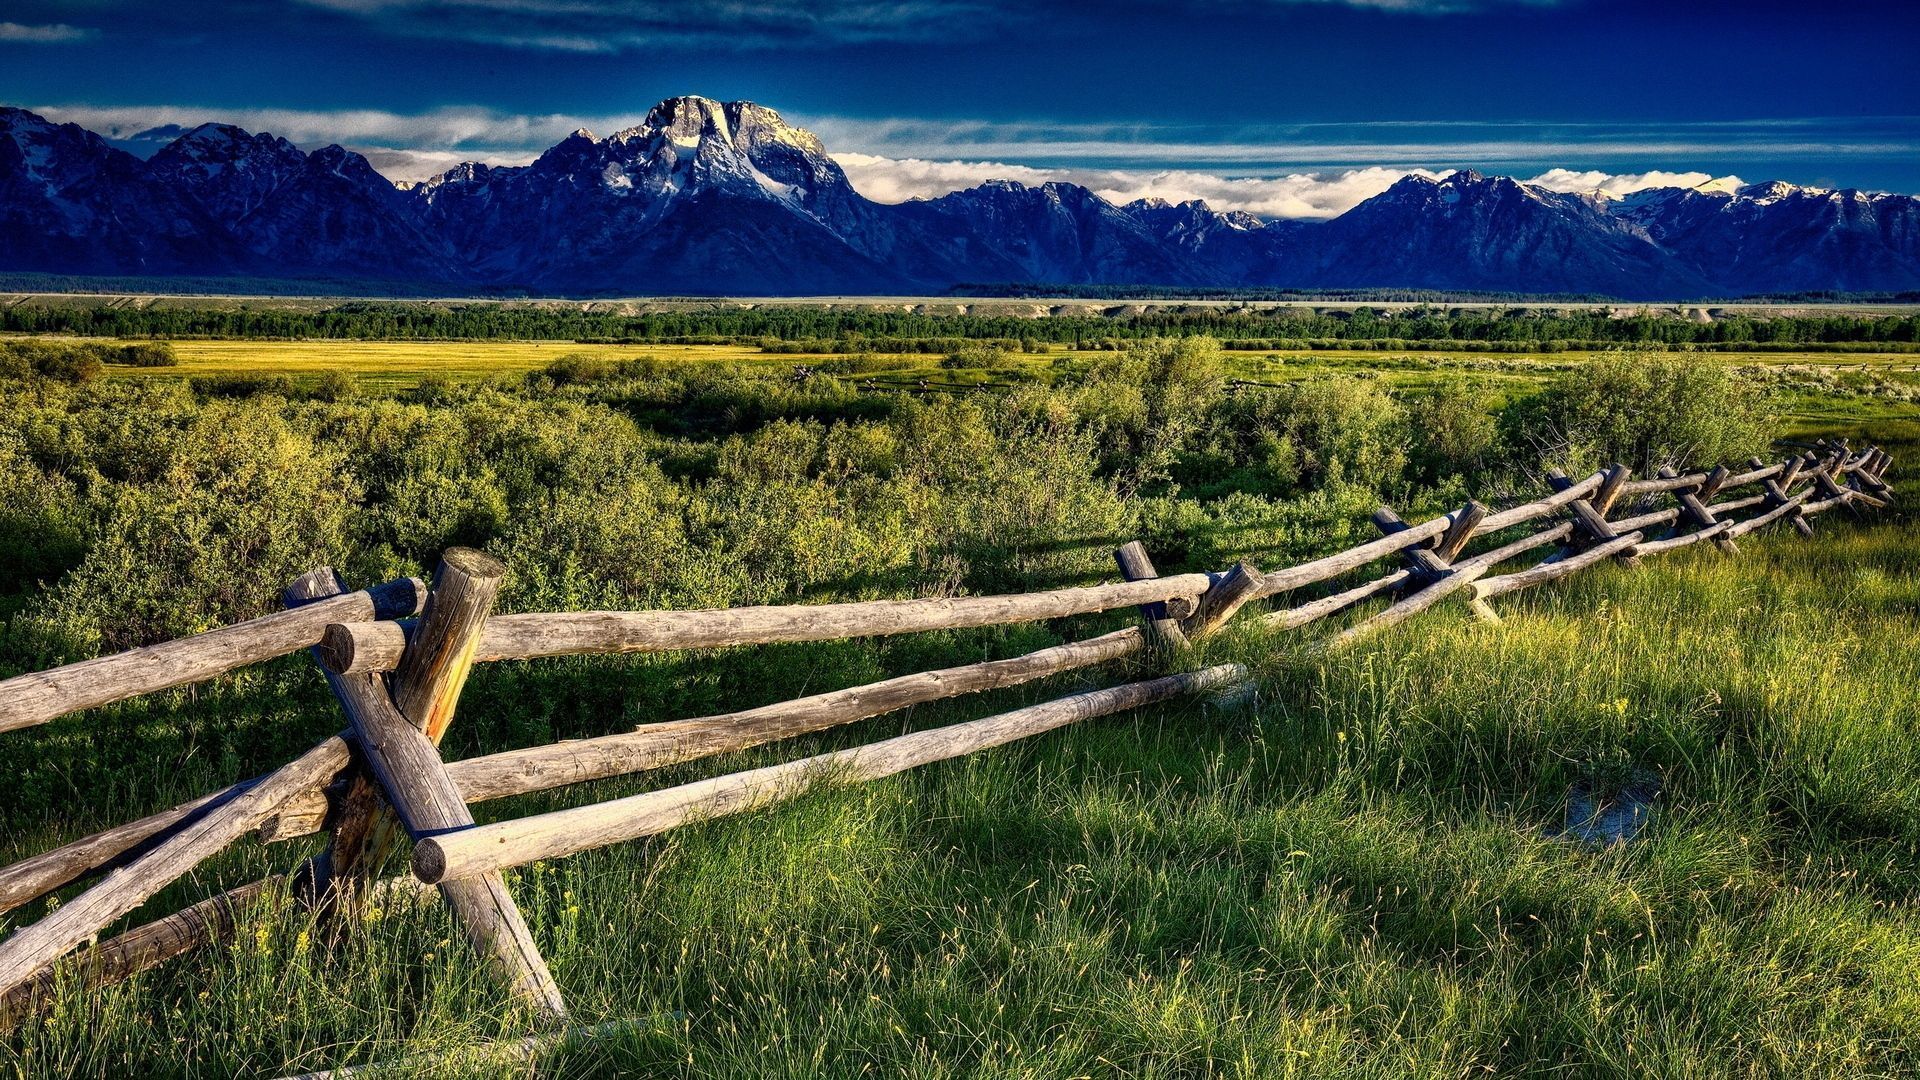 Download Wallpaper 1920x1080 Protection, Fence, Mountains, Fields ...